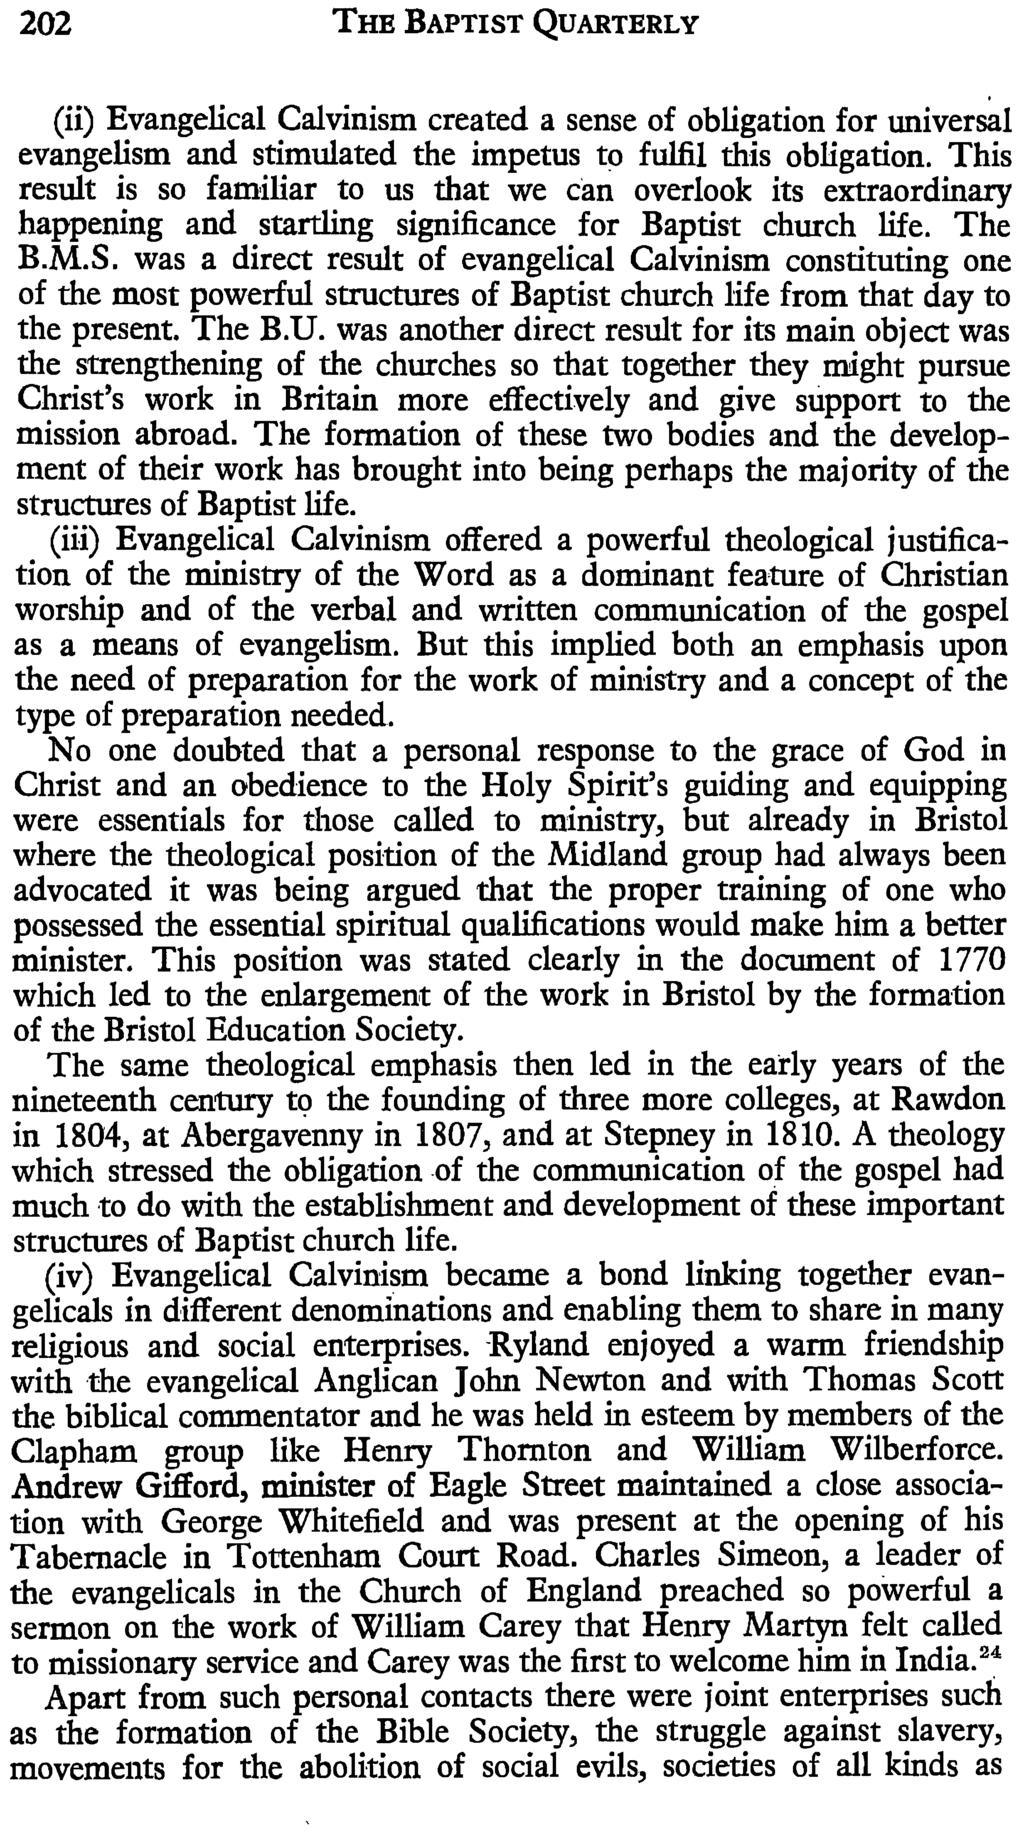 202 THE BAPTIST QUARTERLY (ii) Evangelical Calvinism created a sense of obligation for univer~~l evangelism and stimulated the impetus to fulfil this obligation.